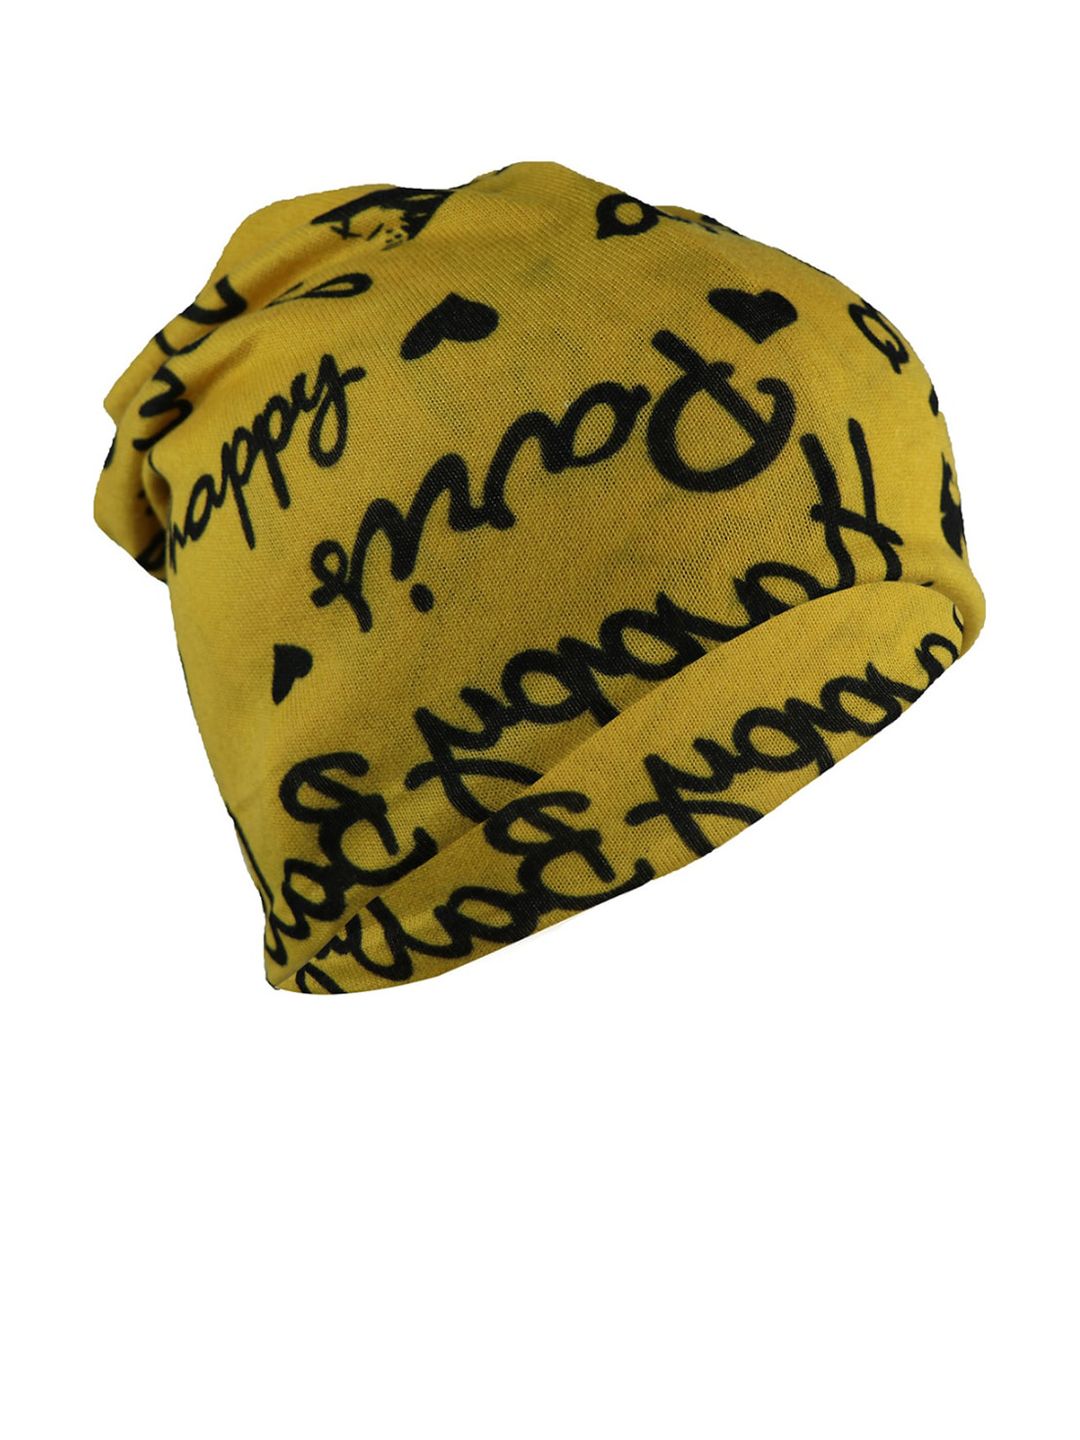 iSWEVEN Unisex Yellow & Black Printed Beanie Price in India